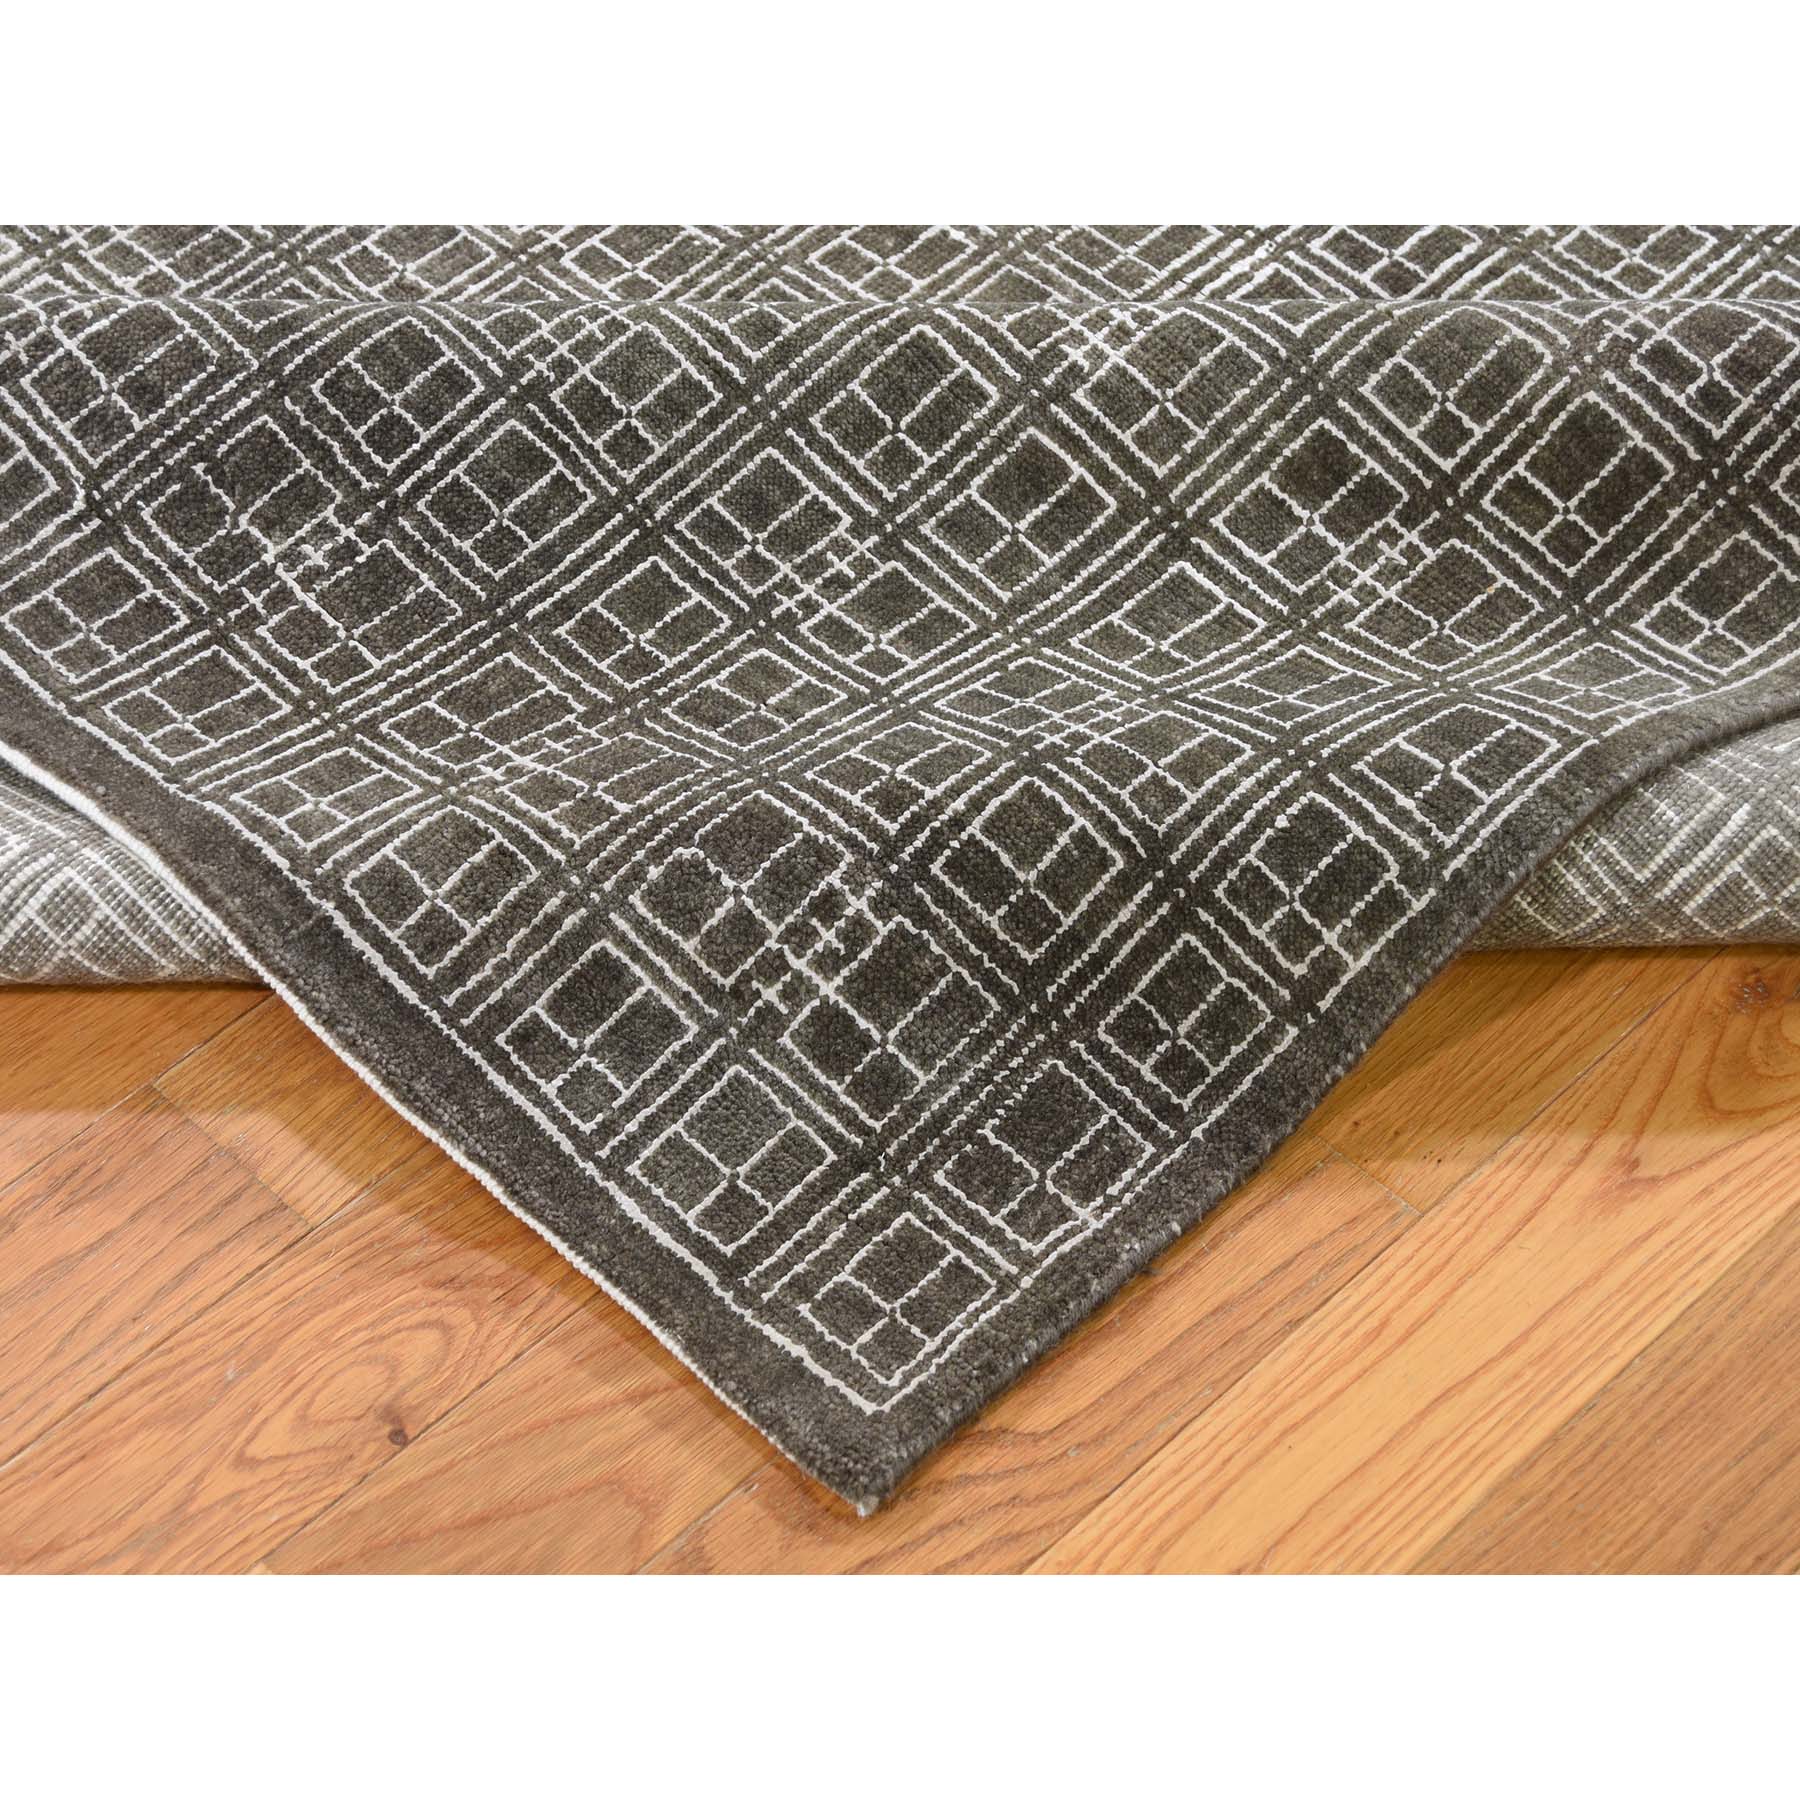 8-1 x9-9  Box Design Wool And Silk Chocolate Brown Hand-Knotted Rug 